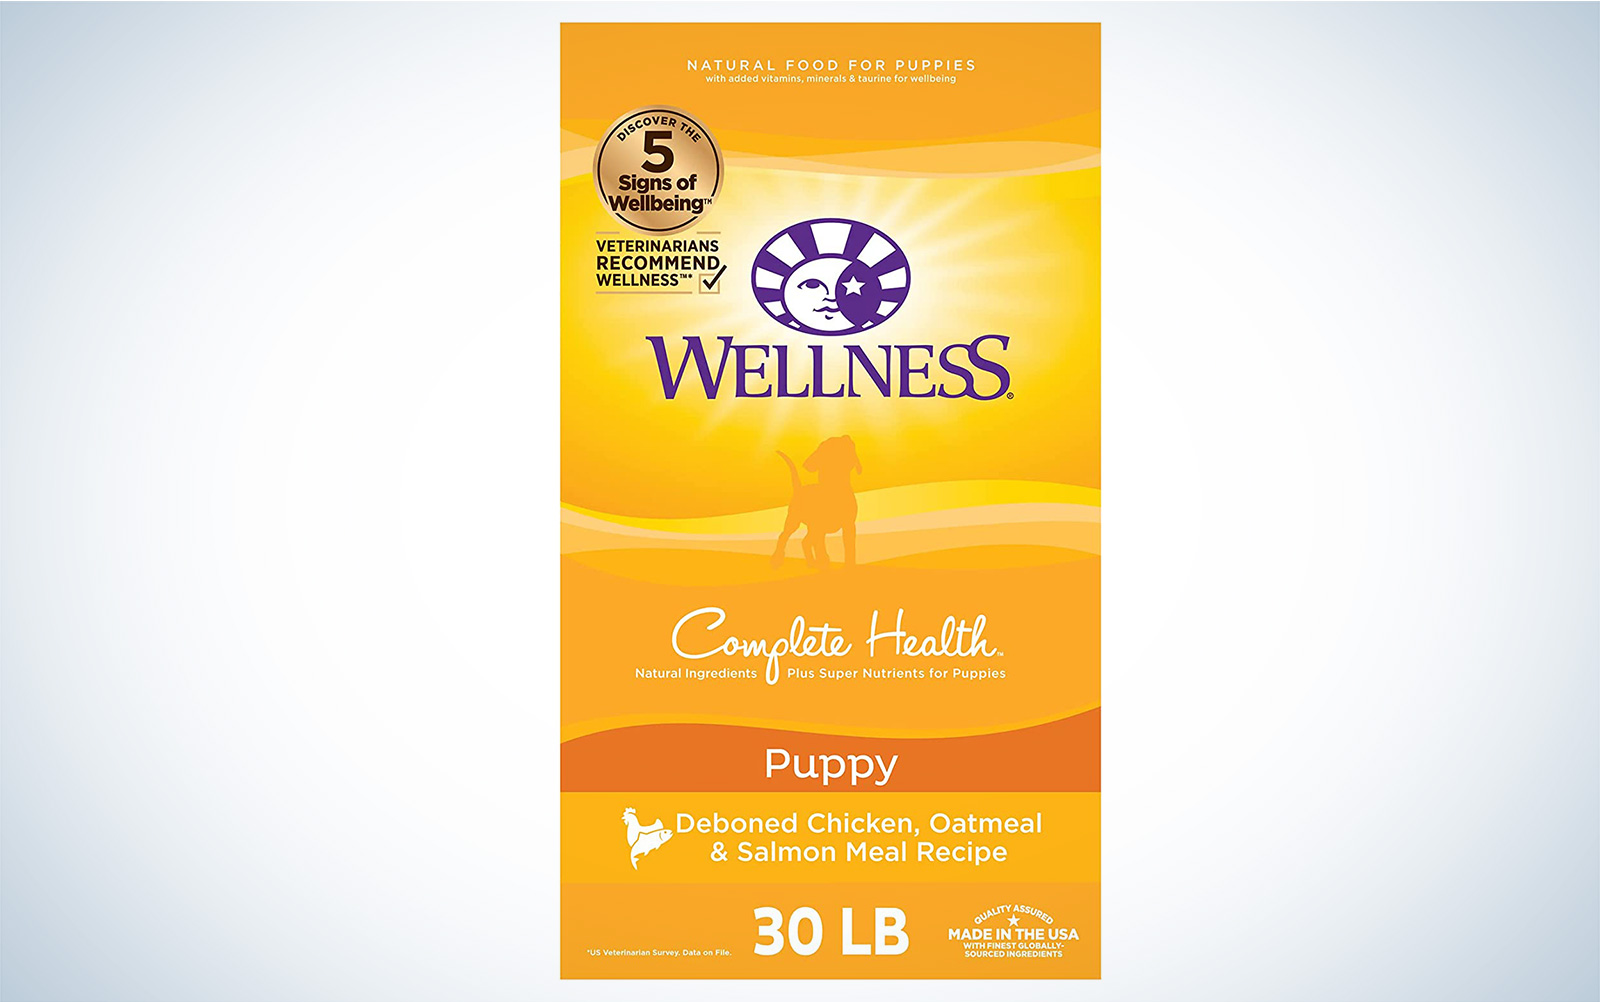 The best dog food for puppies Wellness bag